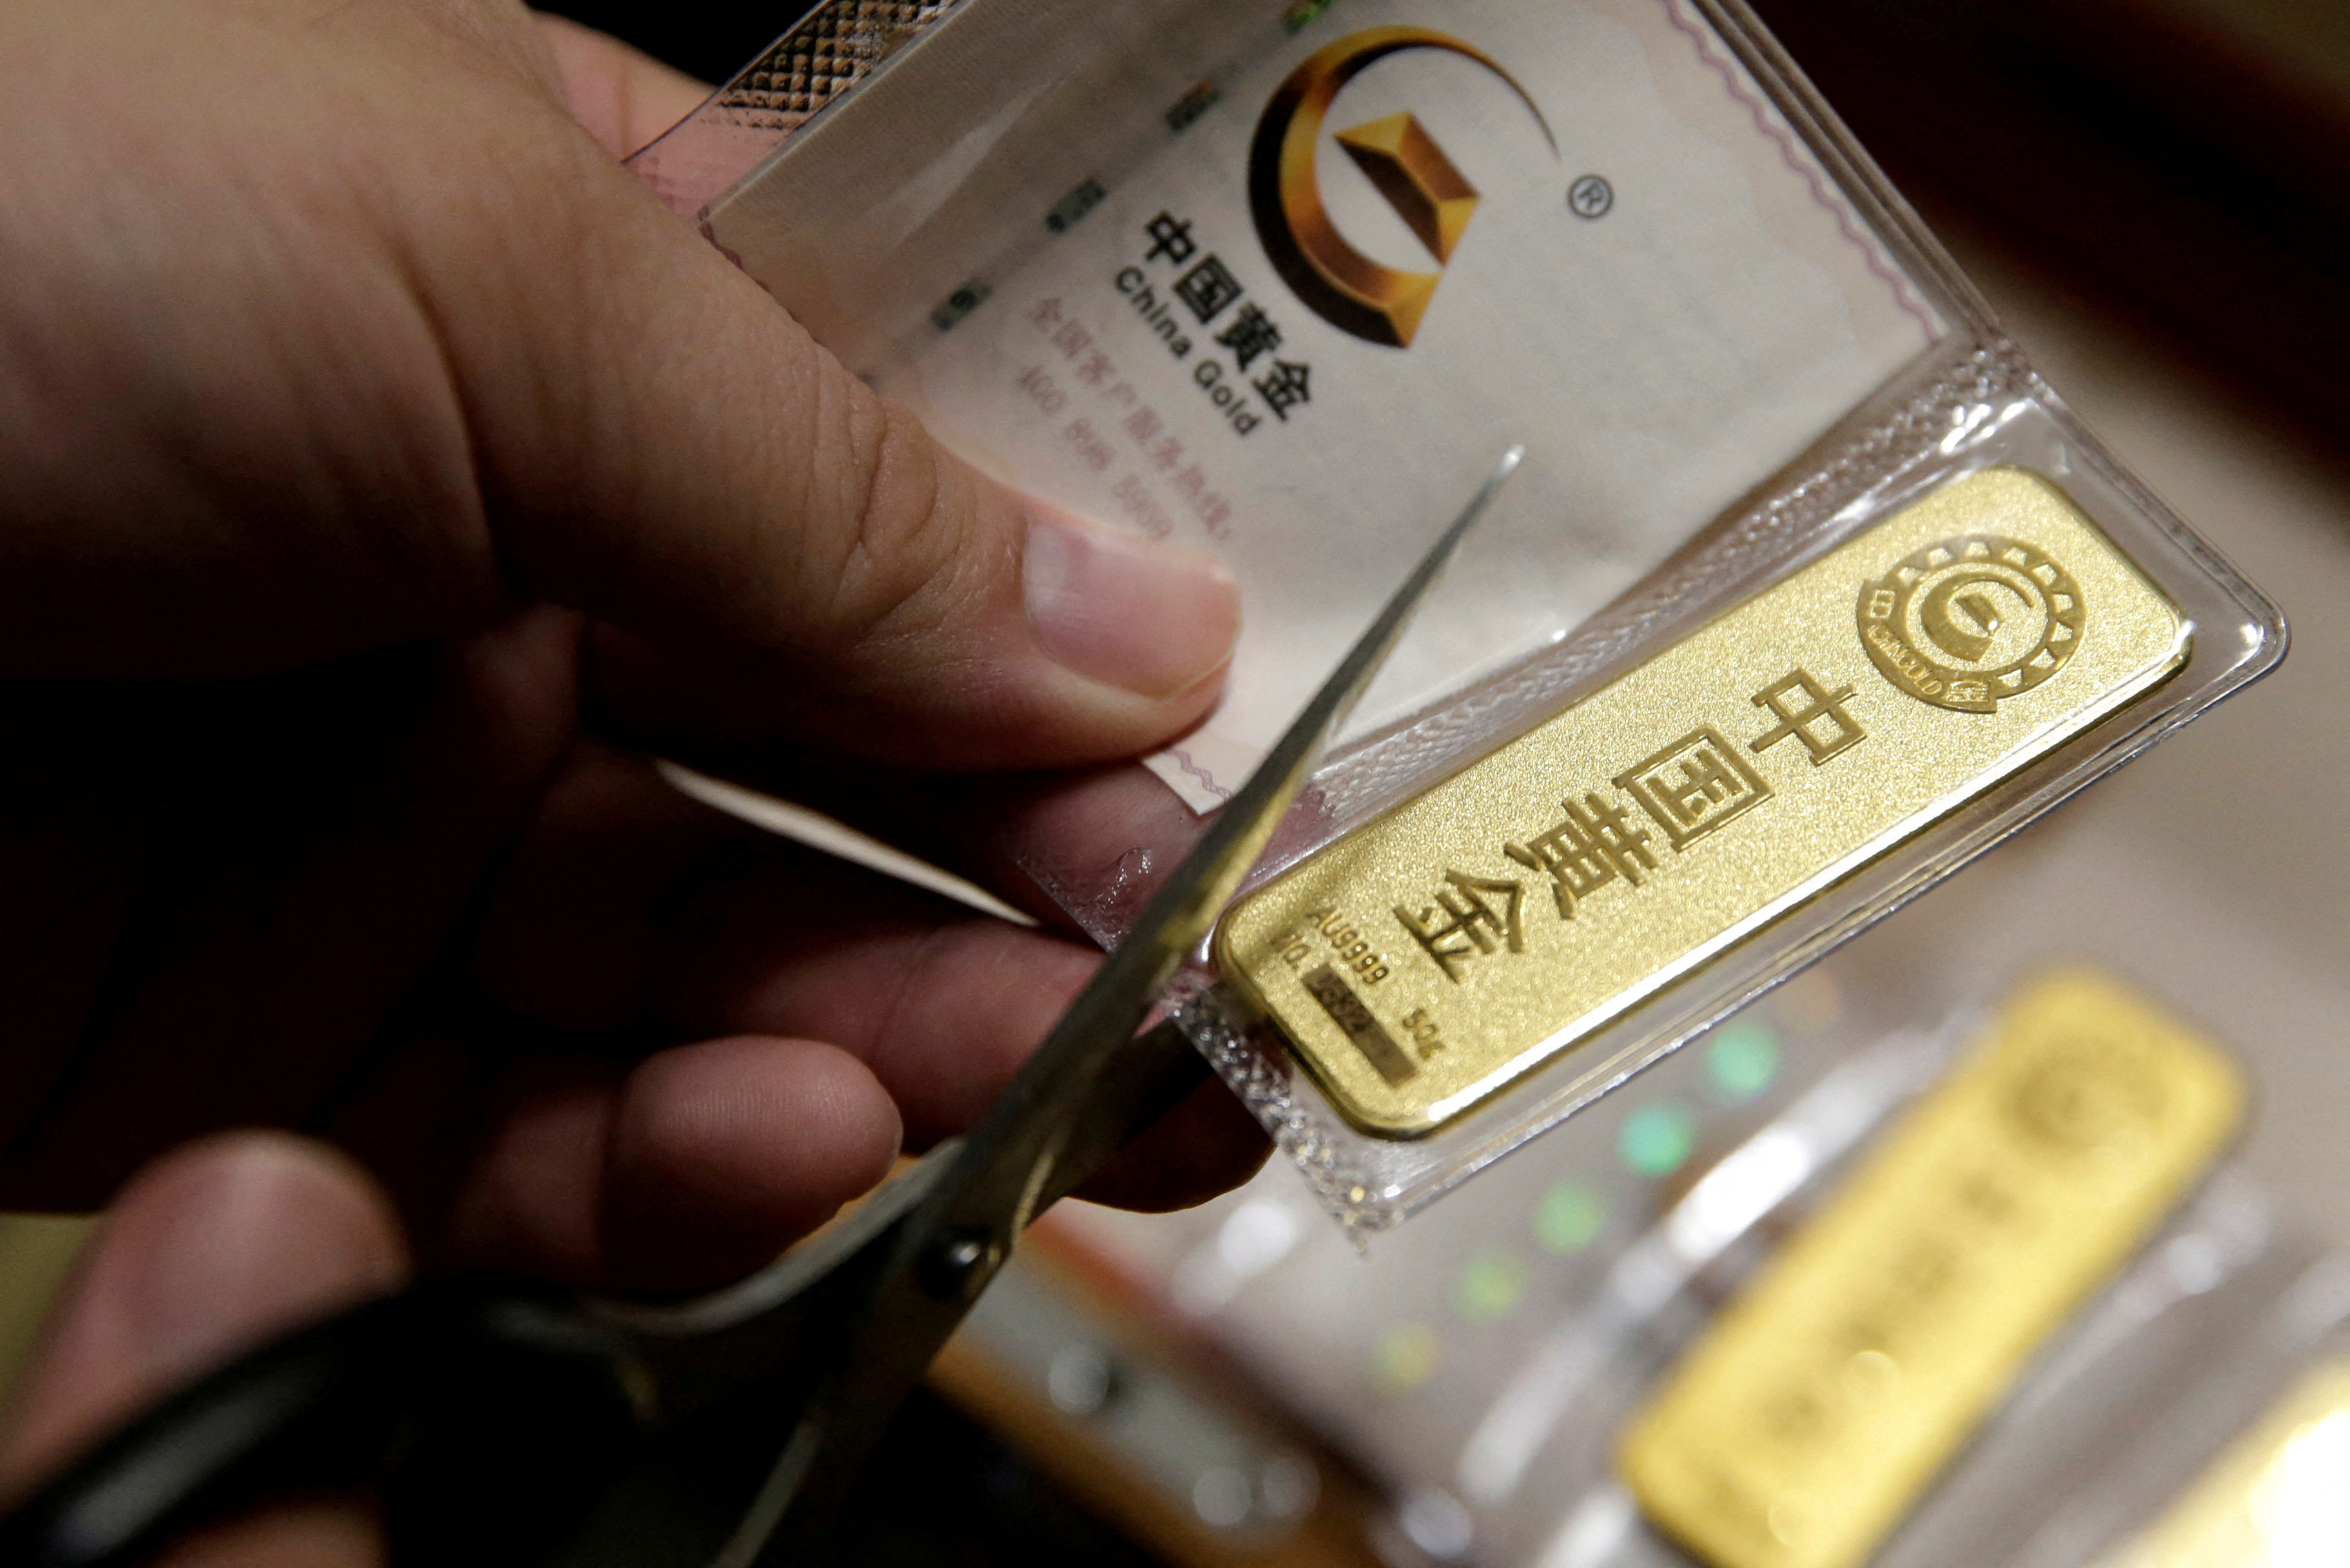 A man cuts open the bag after he bought 50 gram gold bars as an investment in Beijing